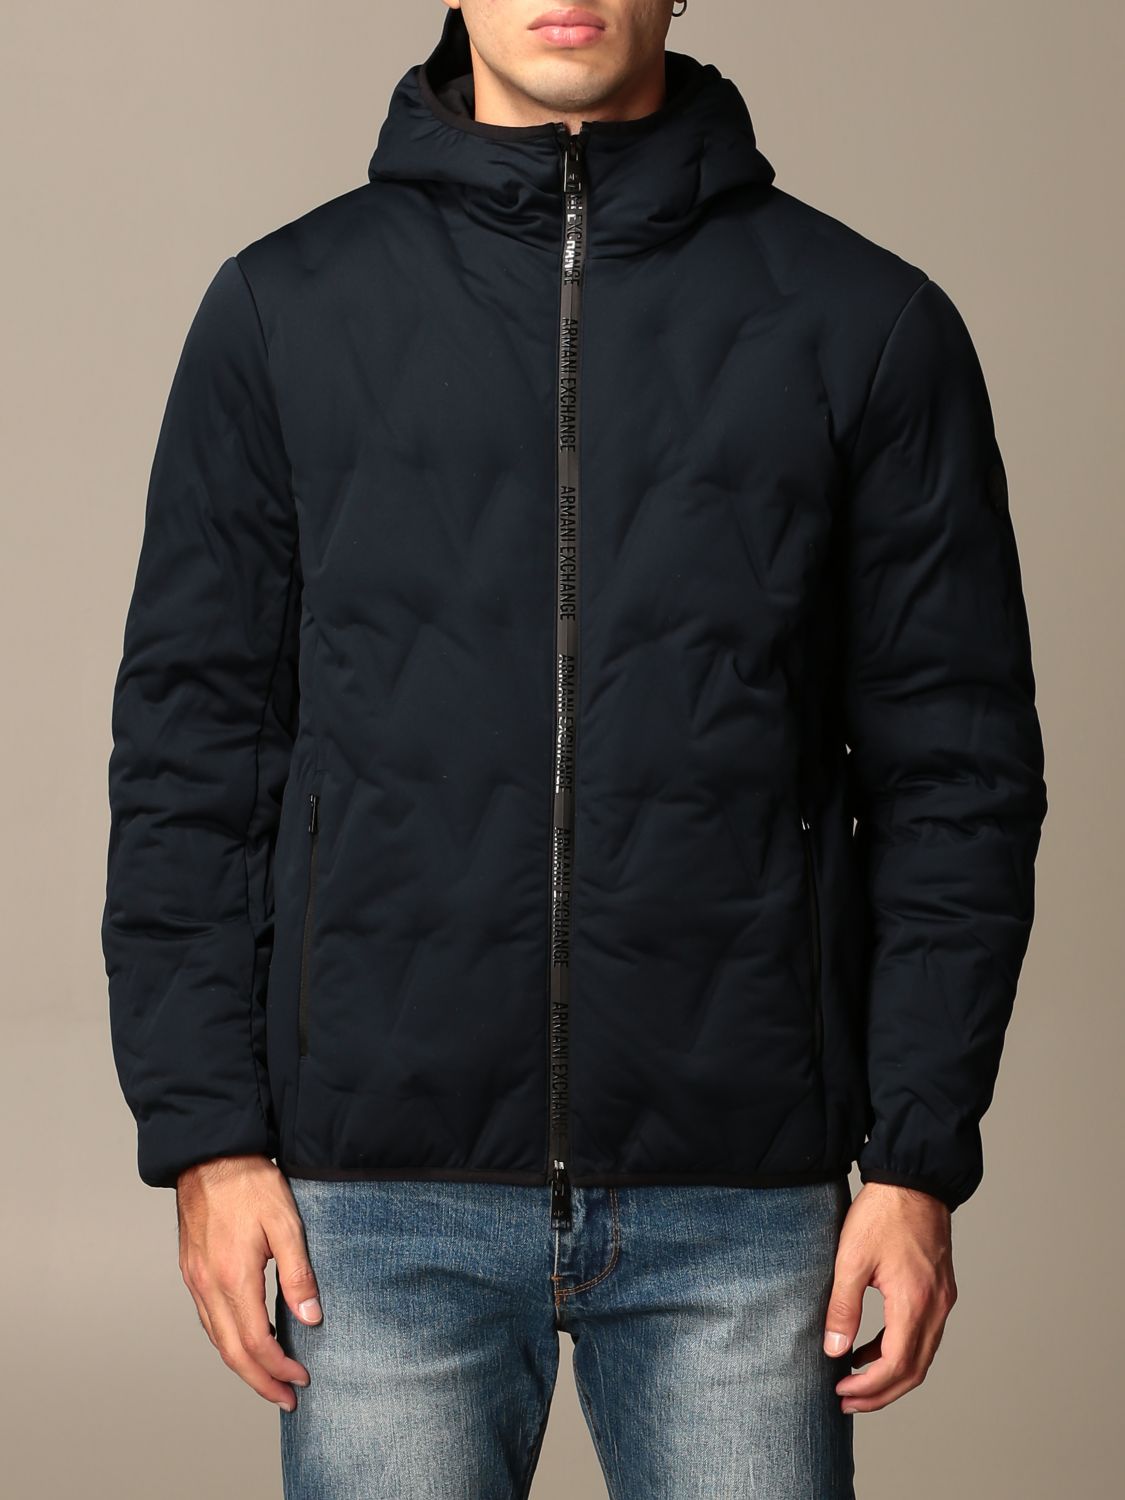 ARMANI EXCHANGE: down jacket in padded technical fabric - Blue | ARMANI ...